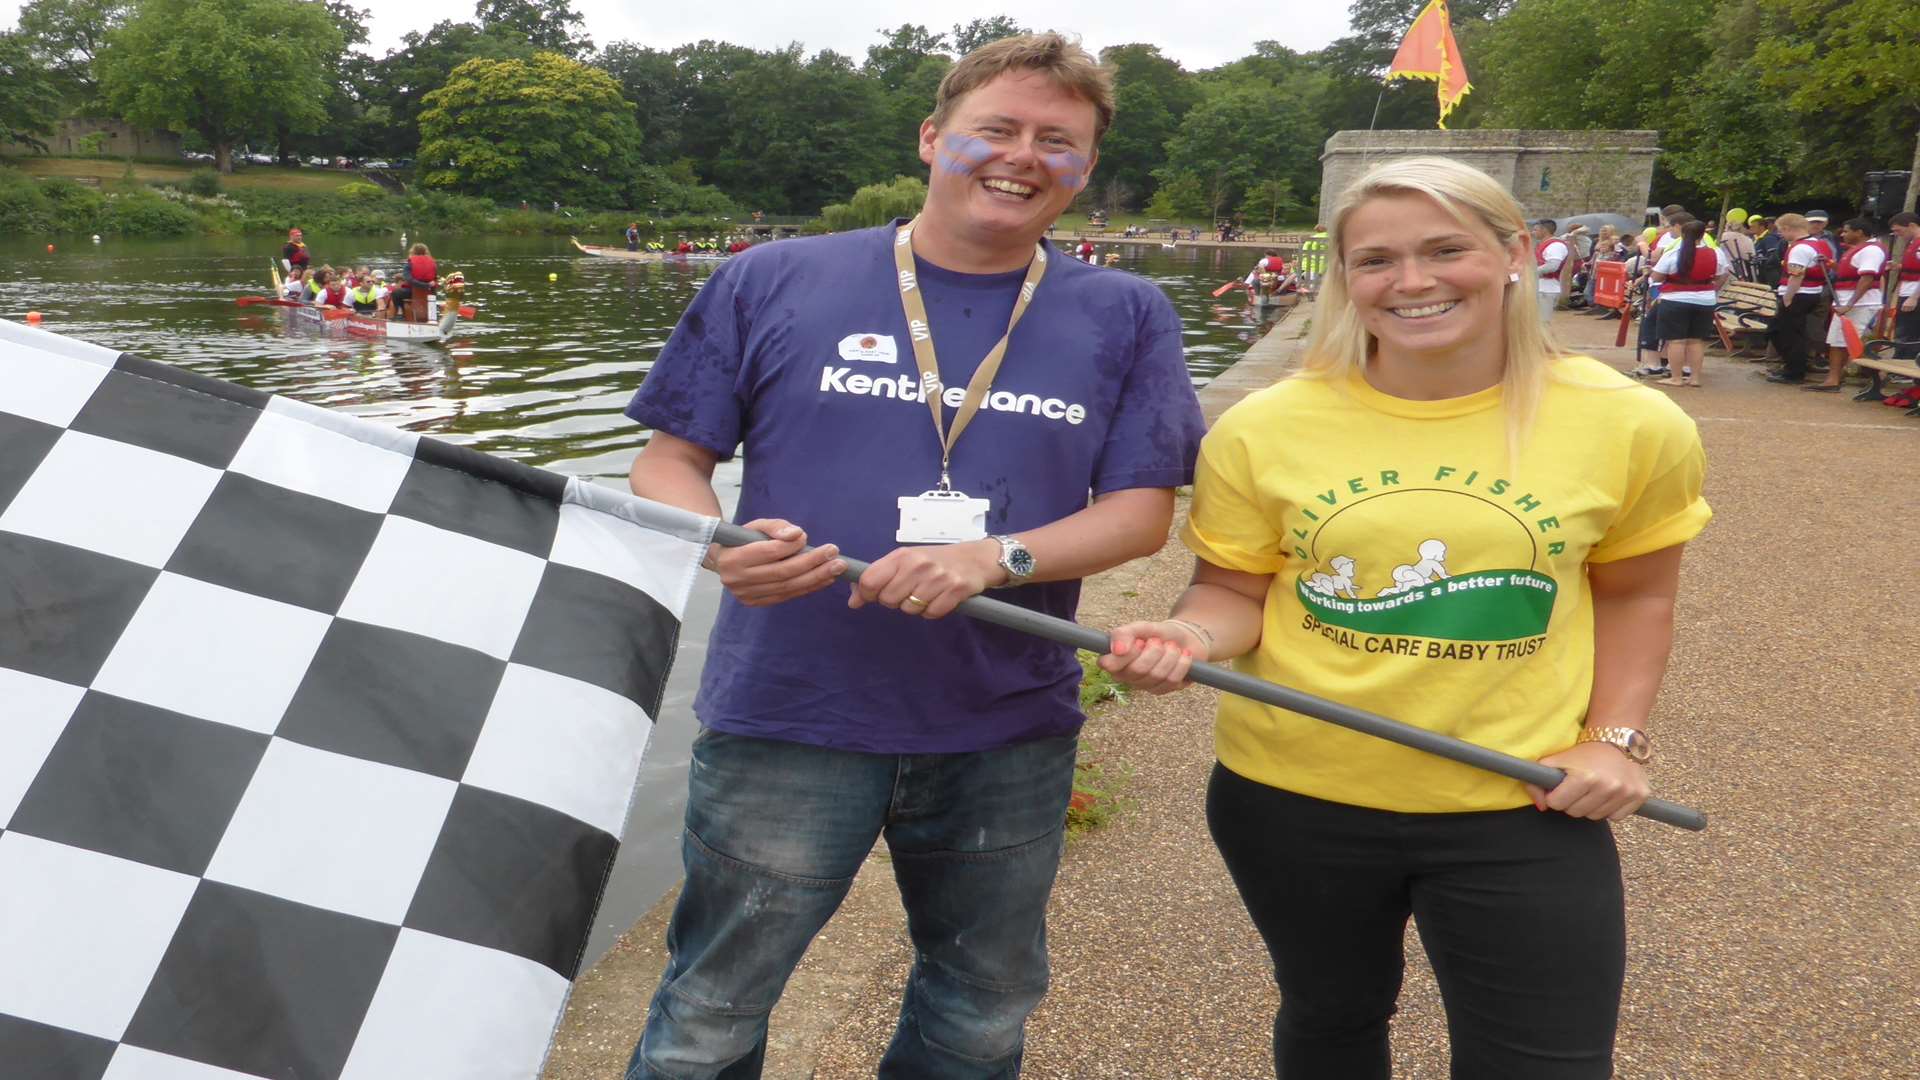 Robert Gurr of Kent Reliance, Chatham, and rugby champ Rachael Burford, Medway waved the chequered flag at the record breaking KM Dragon Boat Race, Mote Park, Maidstone where 43 teams raised £100k for 25 charities.